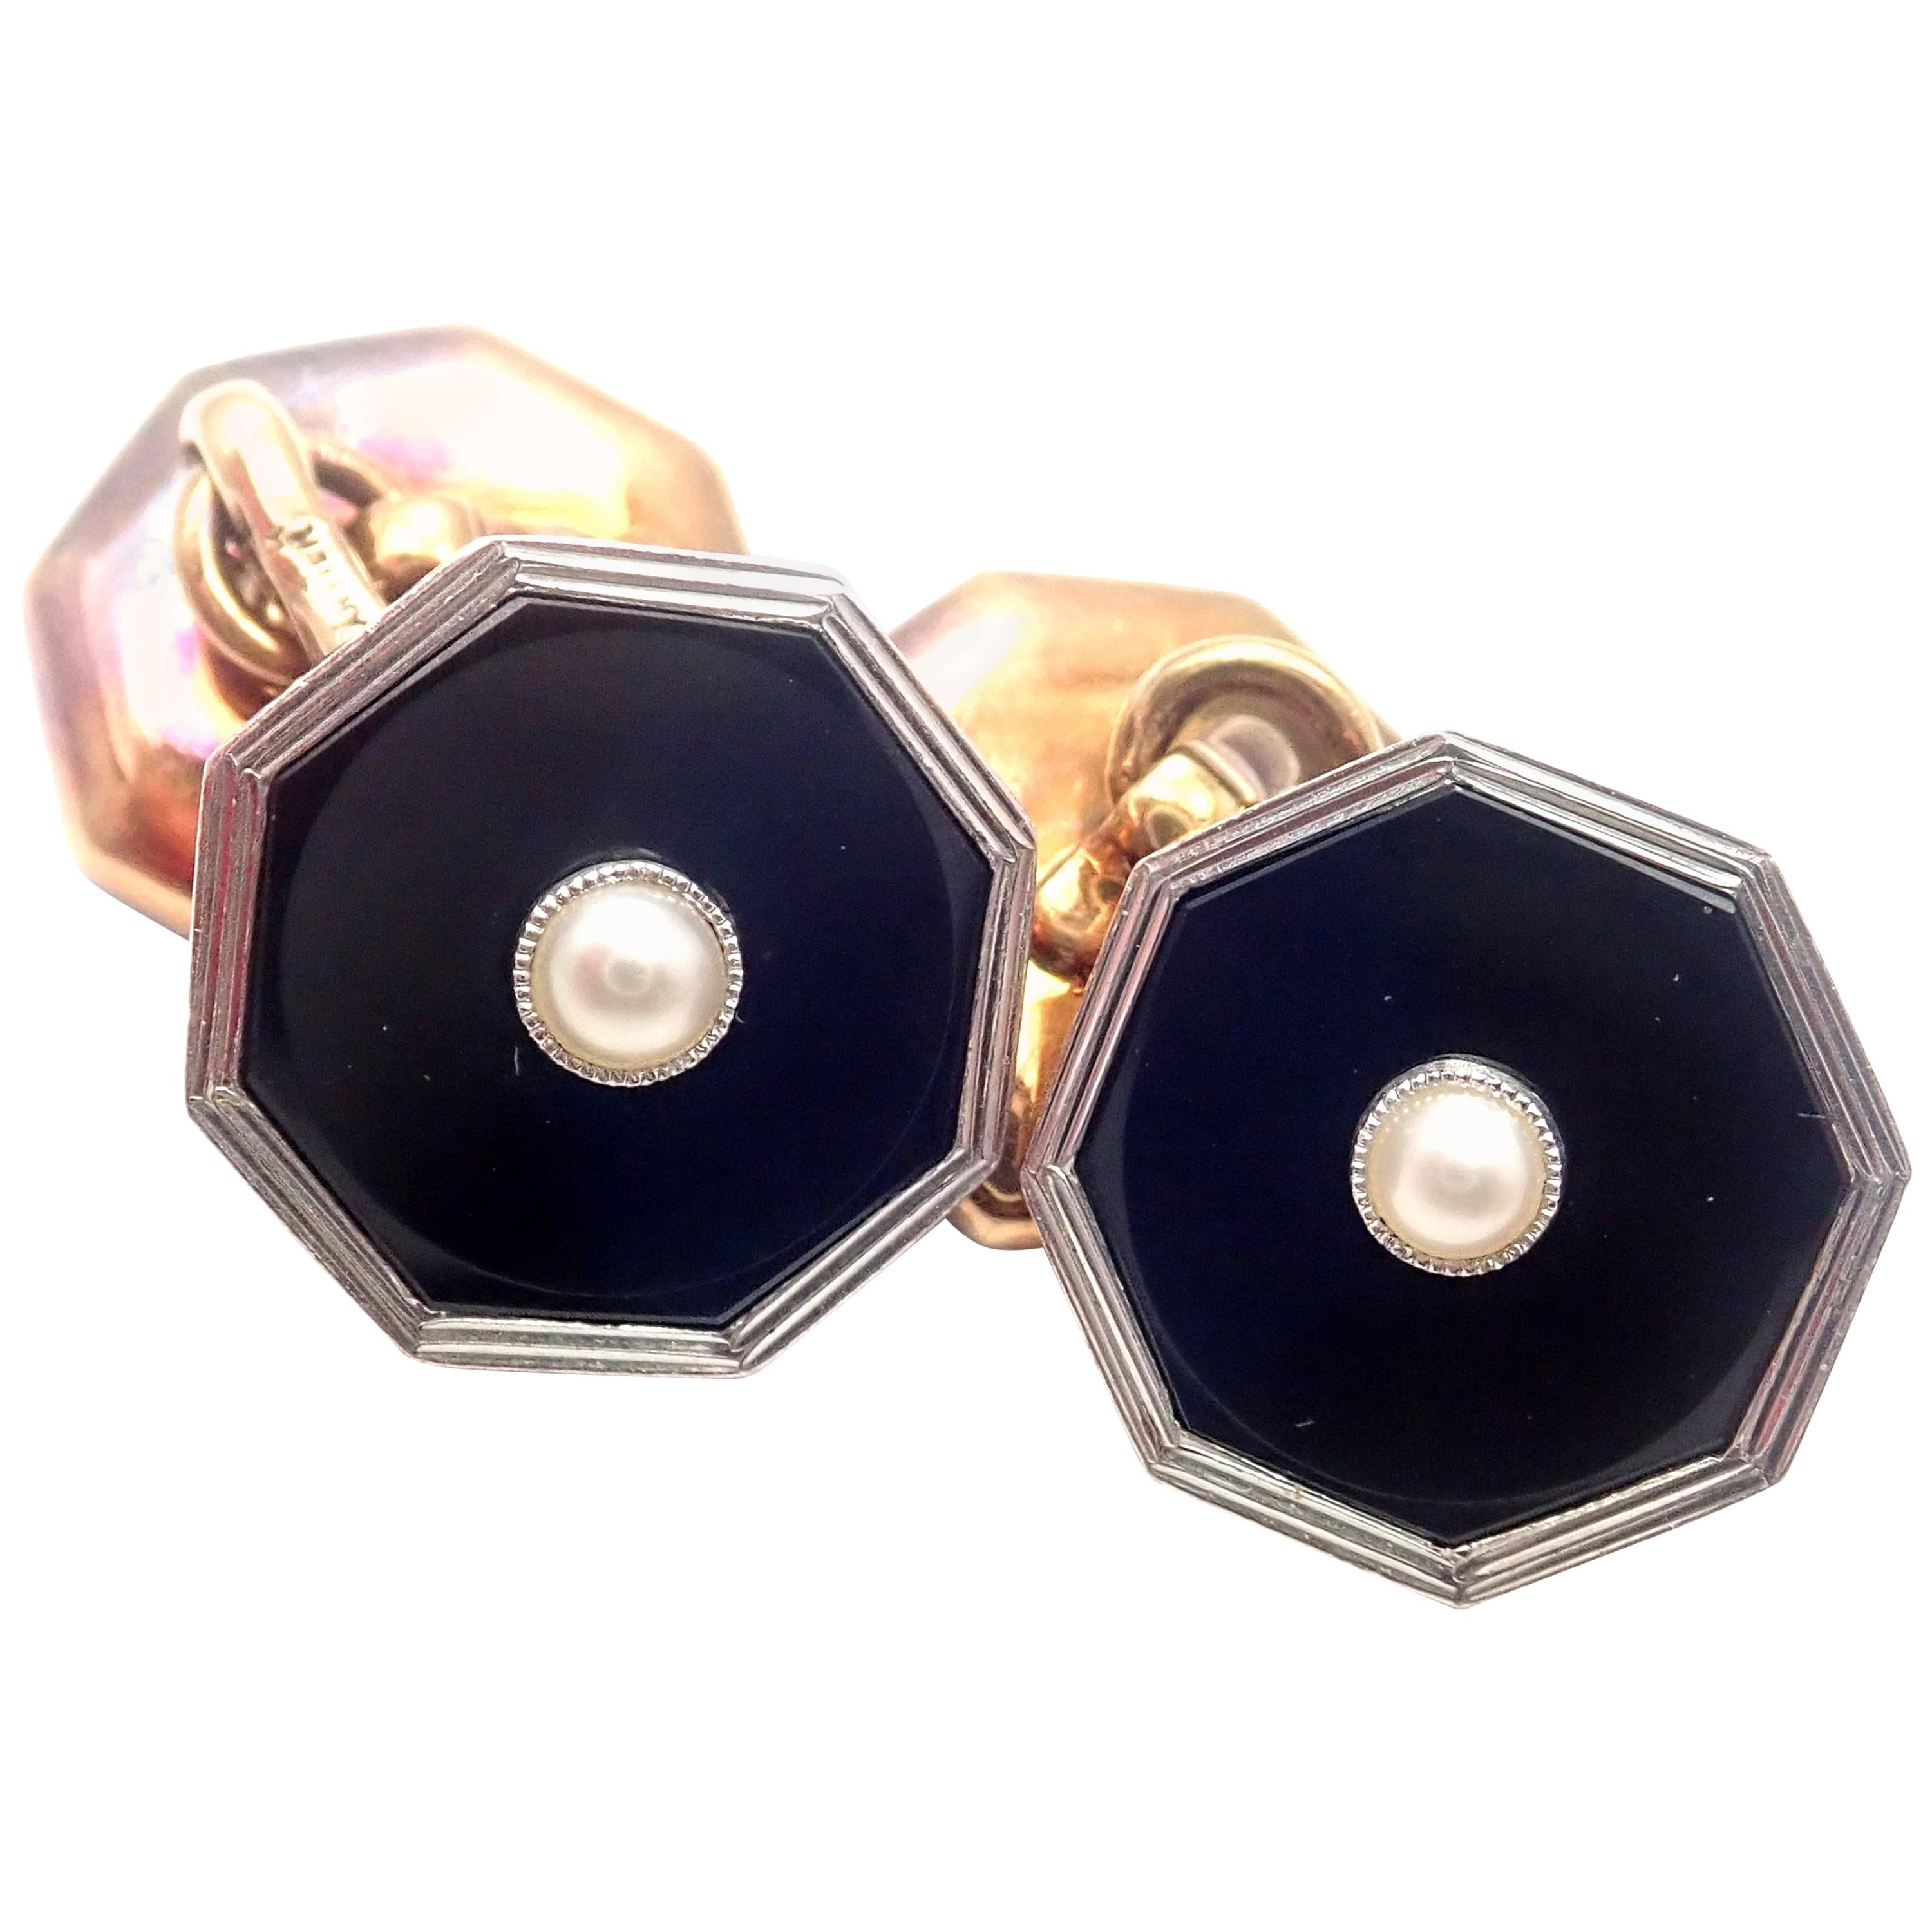 Vintage Cartier Onyx Pearl Platinum and Yellow Gold Cufflinks